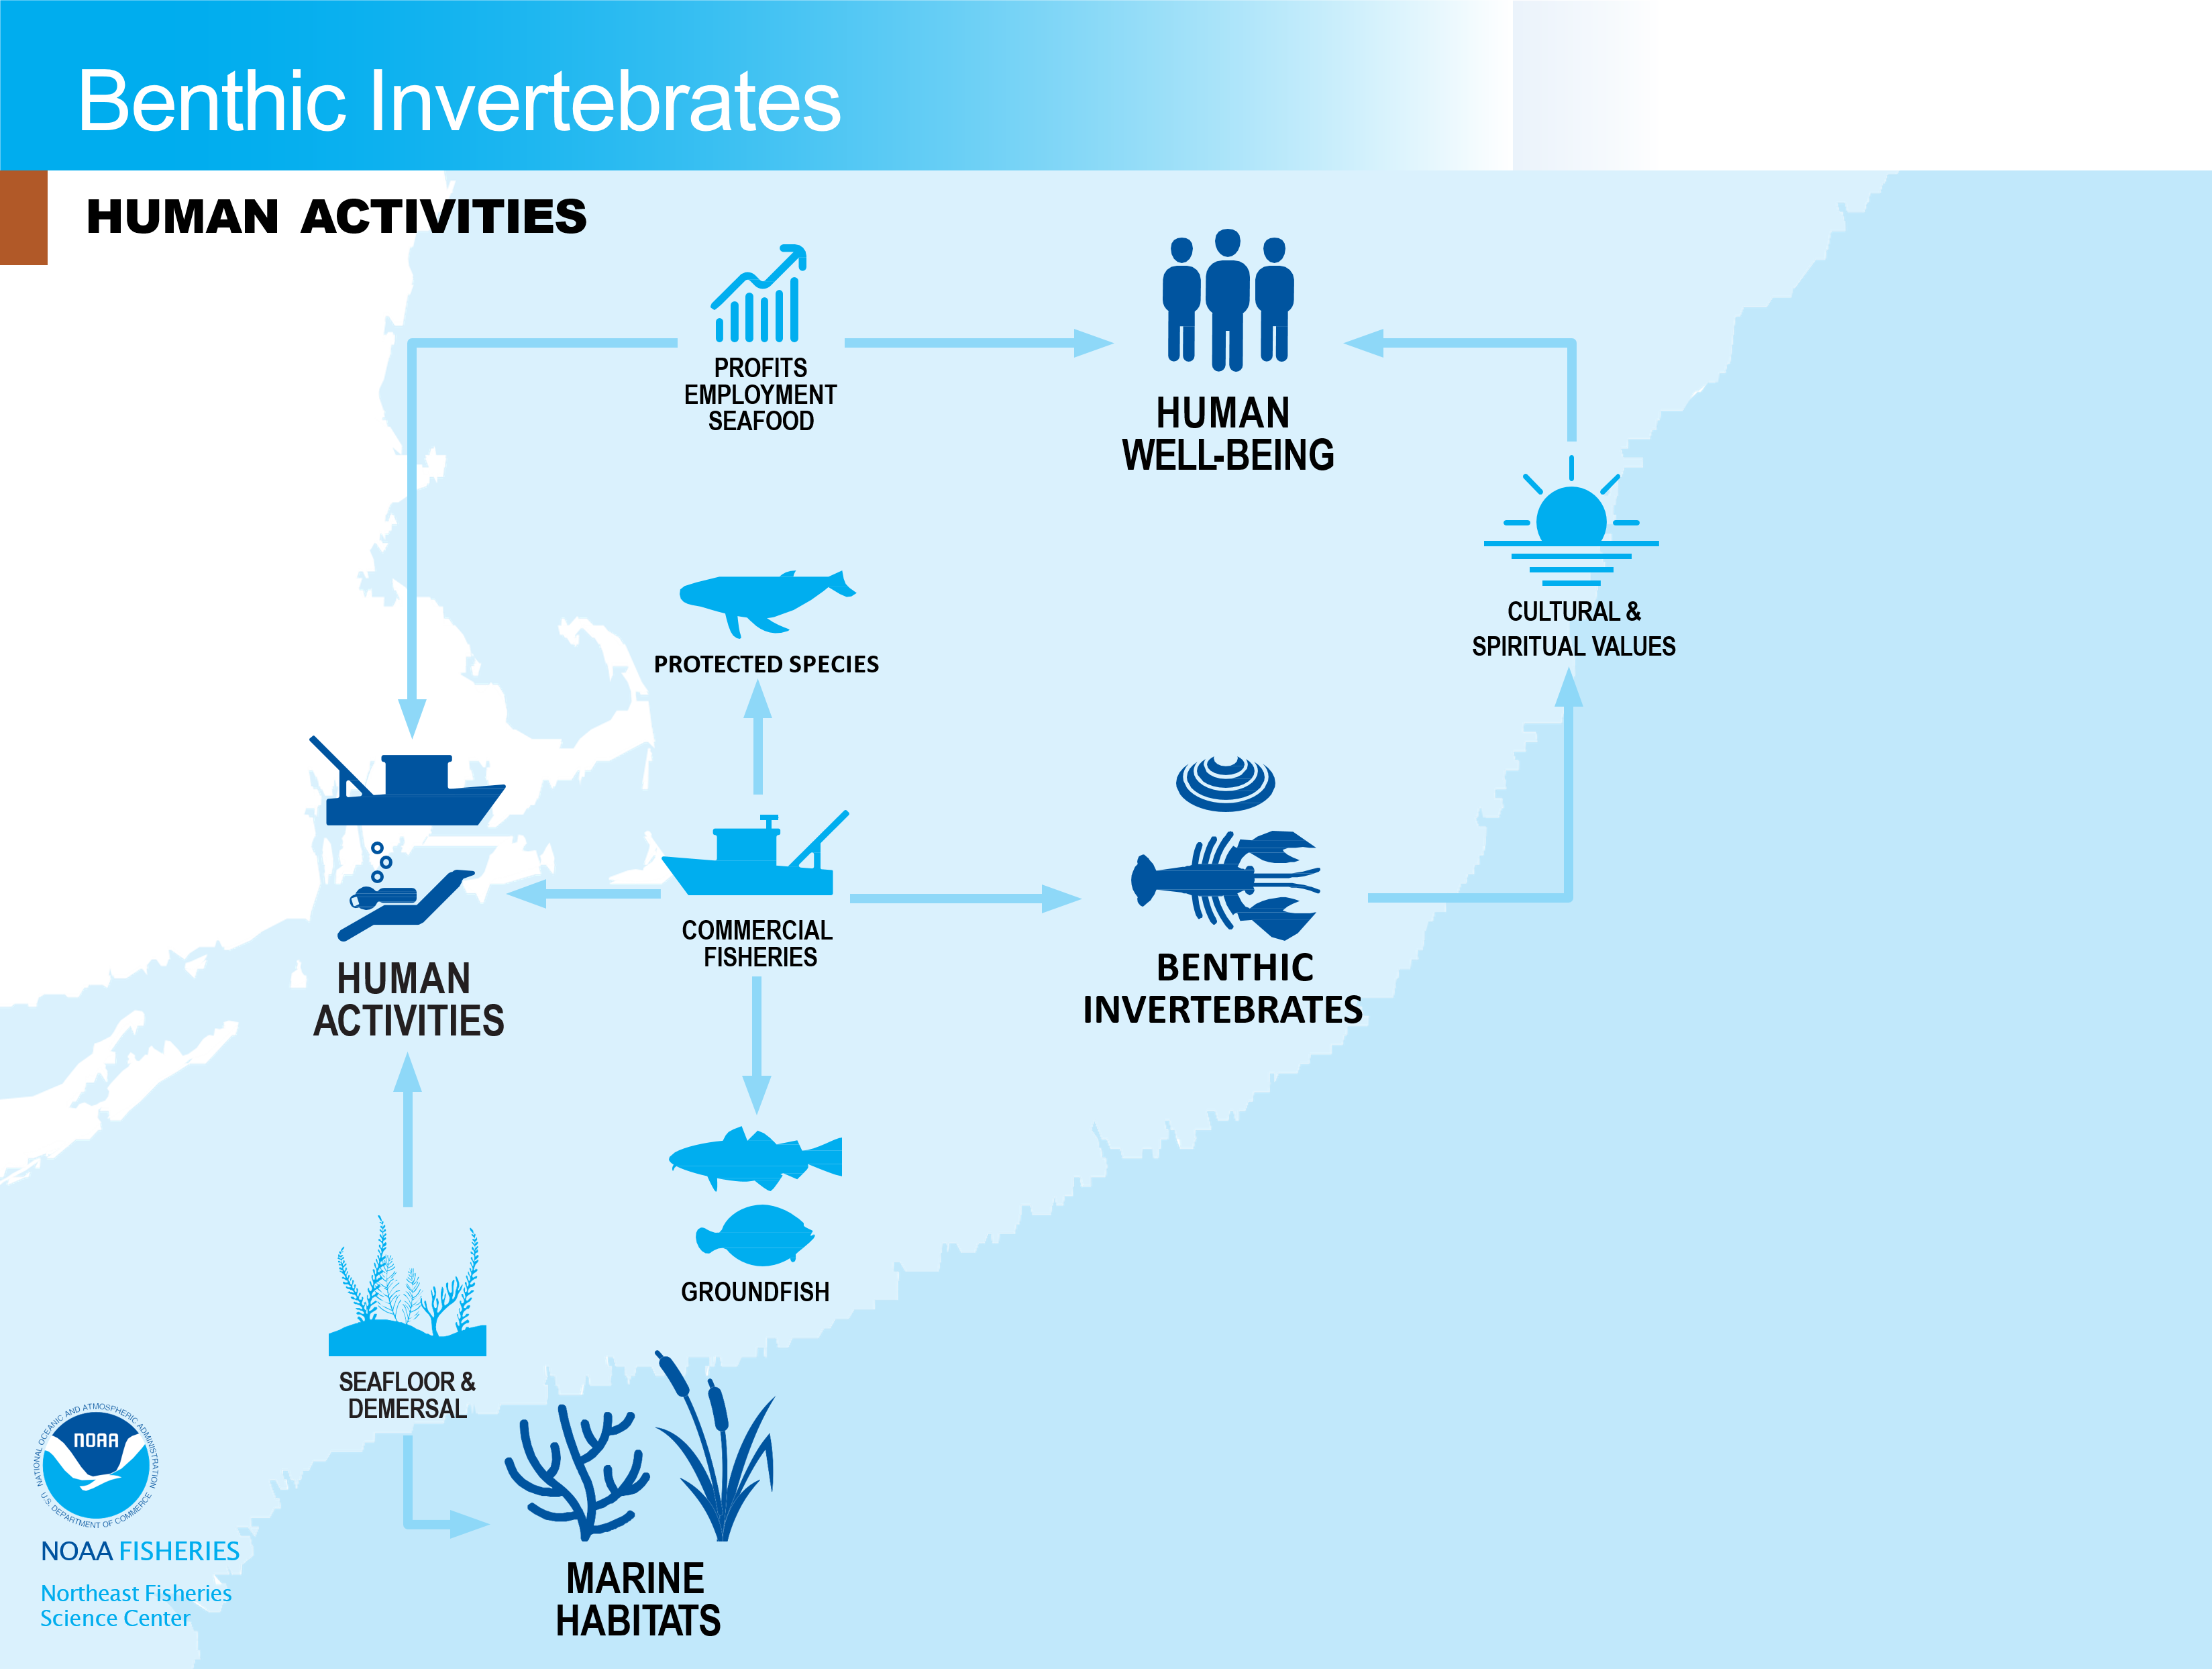 Conceptual model of human activities related to benthic invertebrates